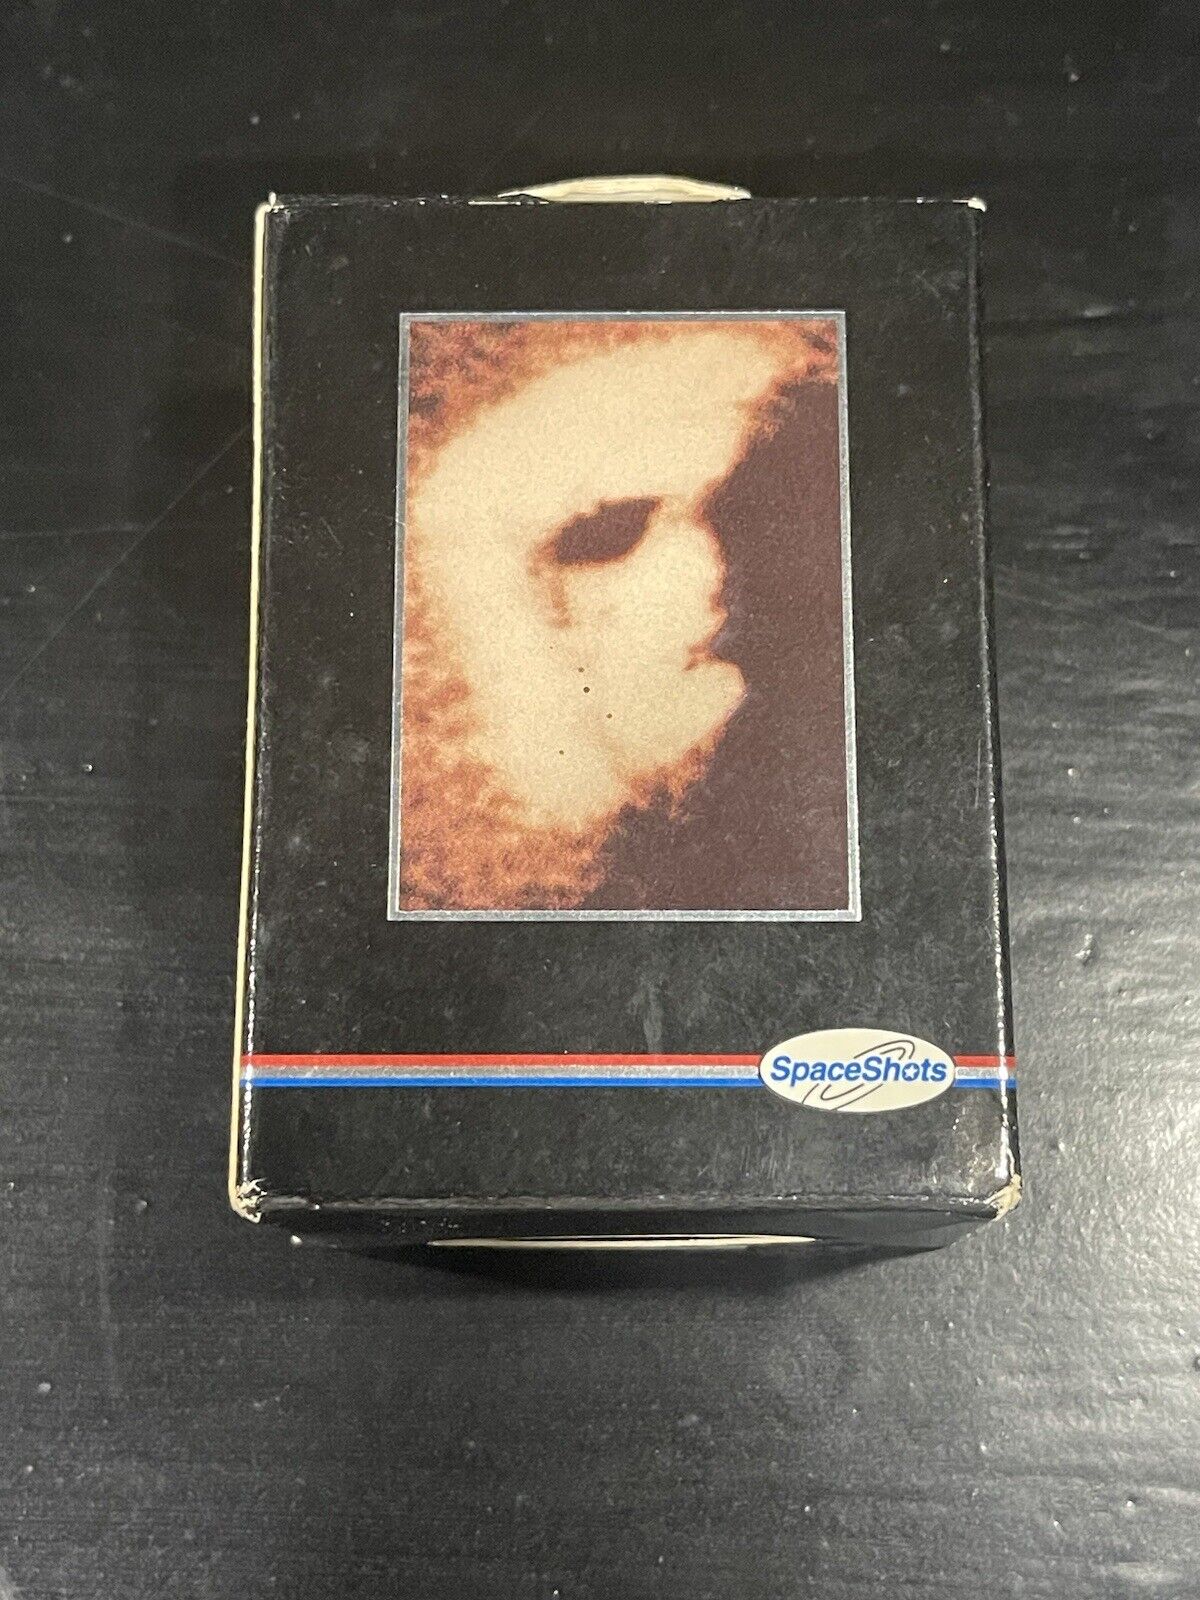 Space Shots Moon Mars - 36 Cards Special Edition In Box Space Ventures (1991)